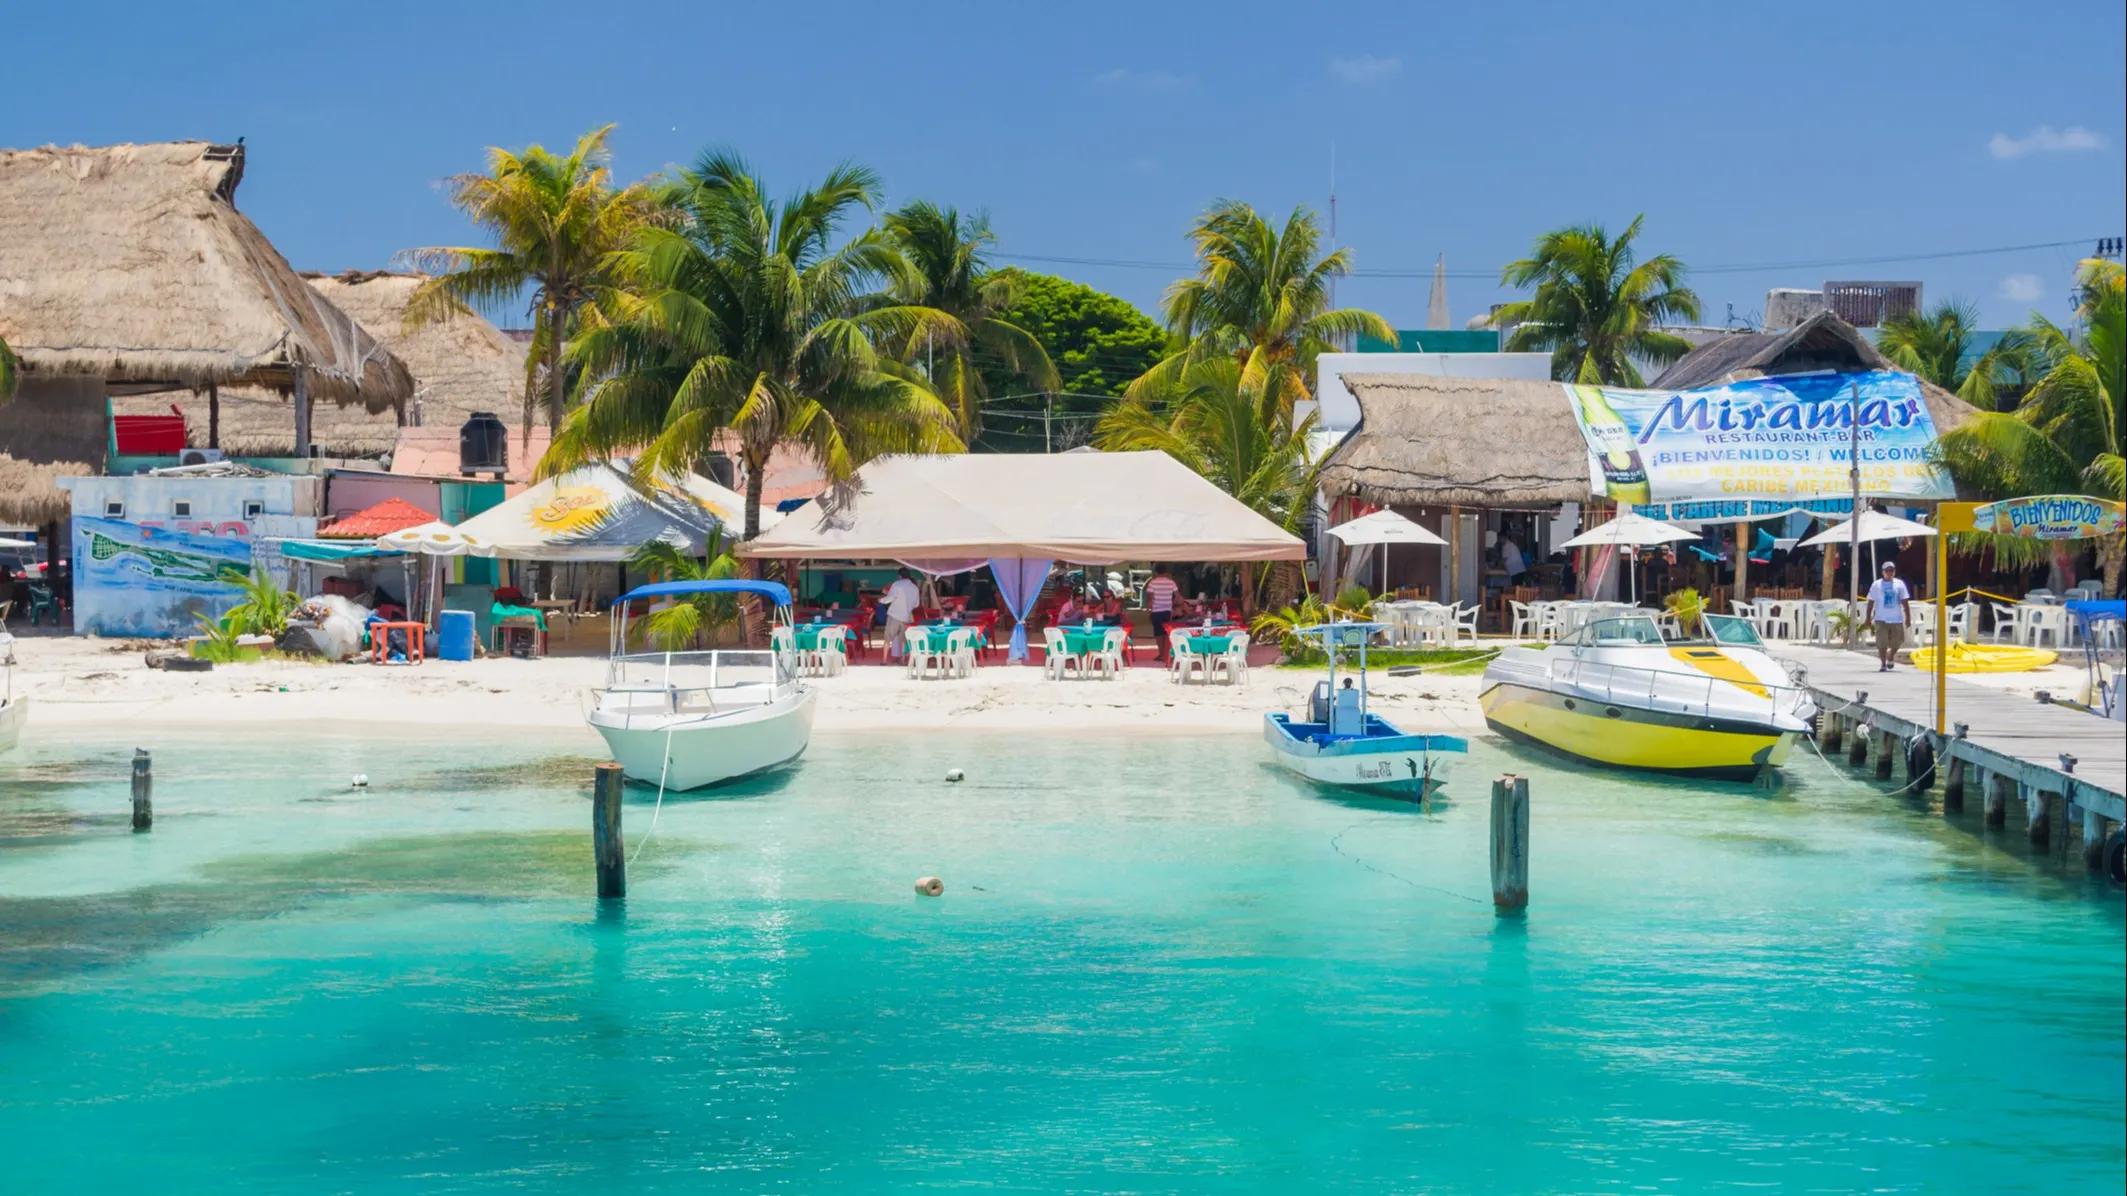 Your sailing adventures can start close to home...Mexico’s Isla Mujeres is a popular spot for sailors